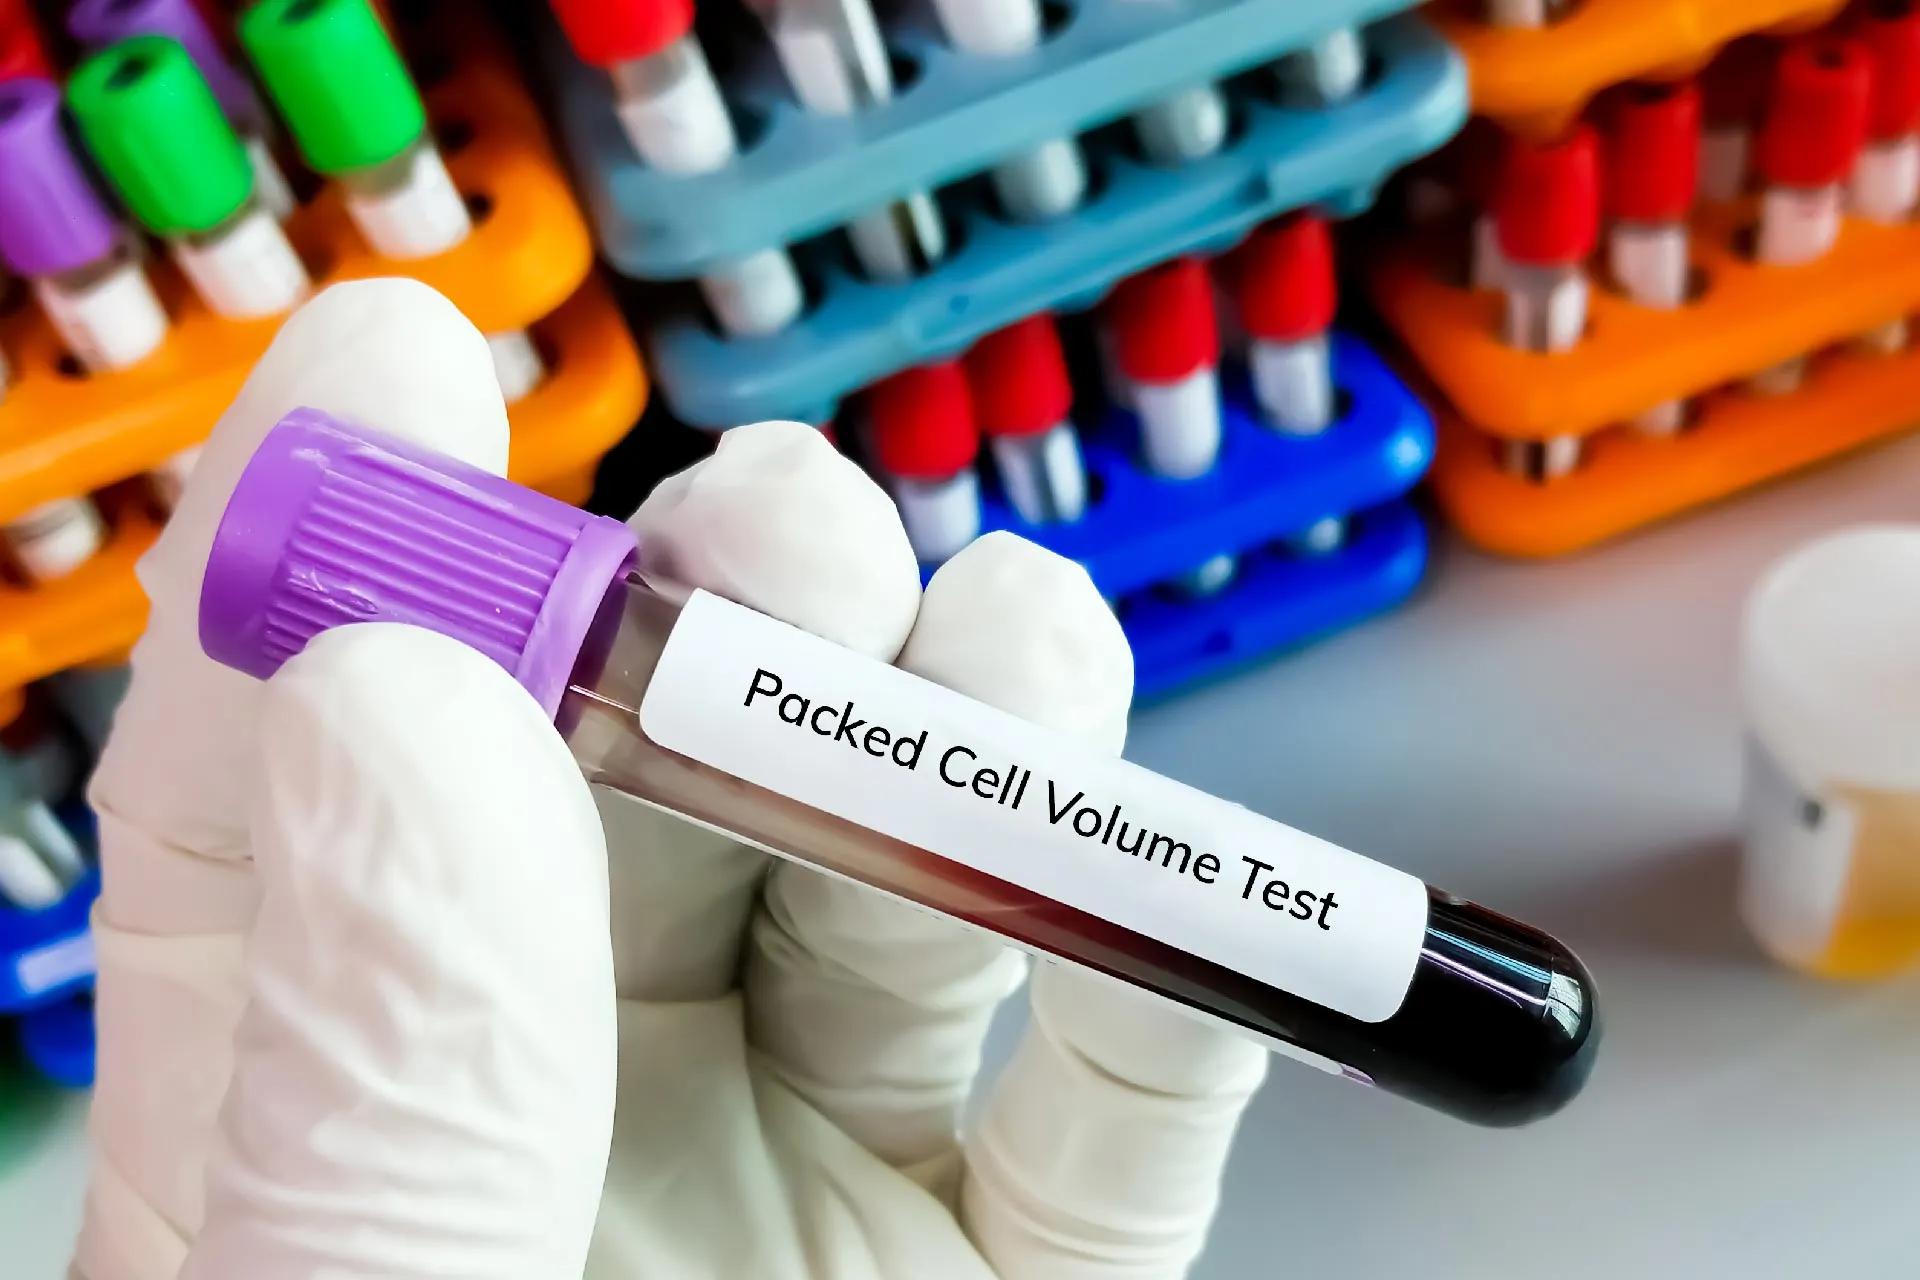 Packed Cell Volume (PCV) Test Normal Range and Result